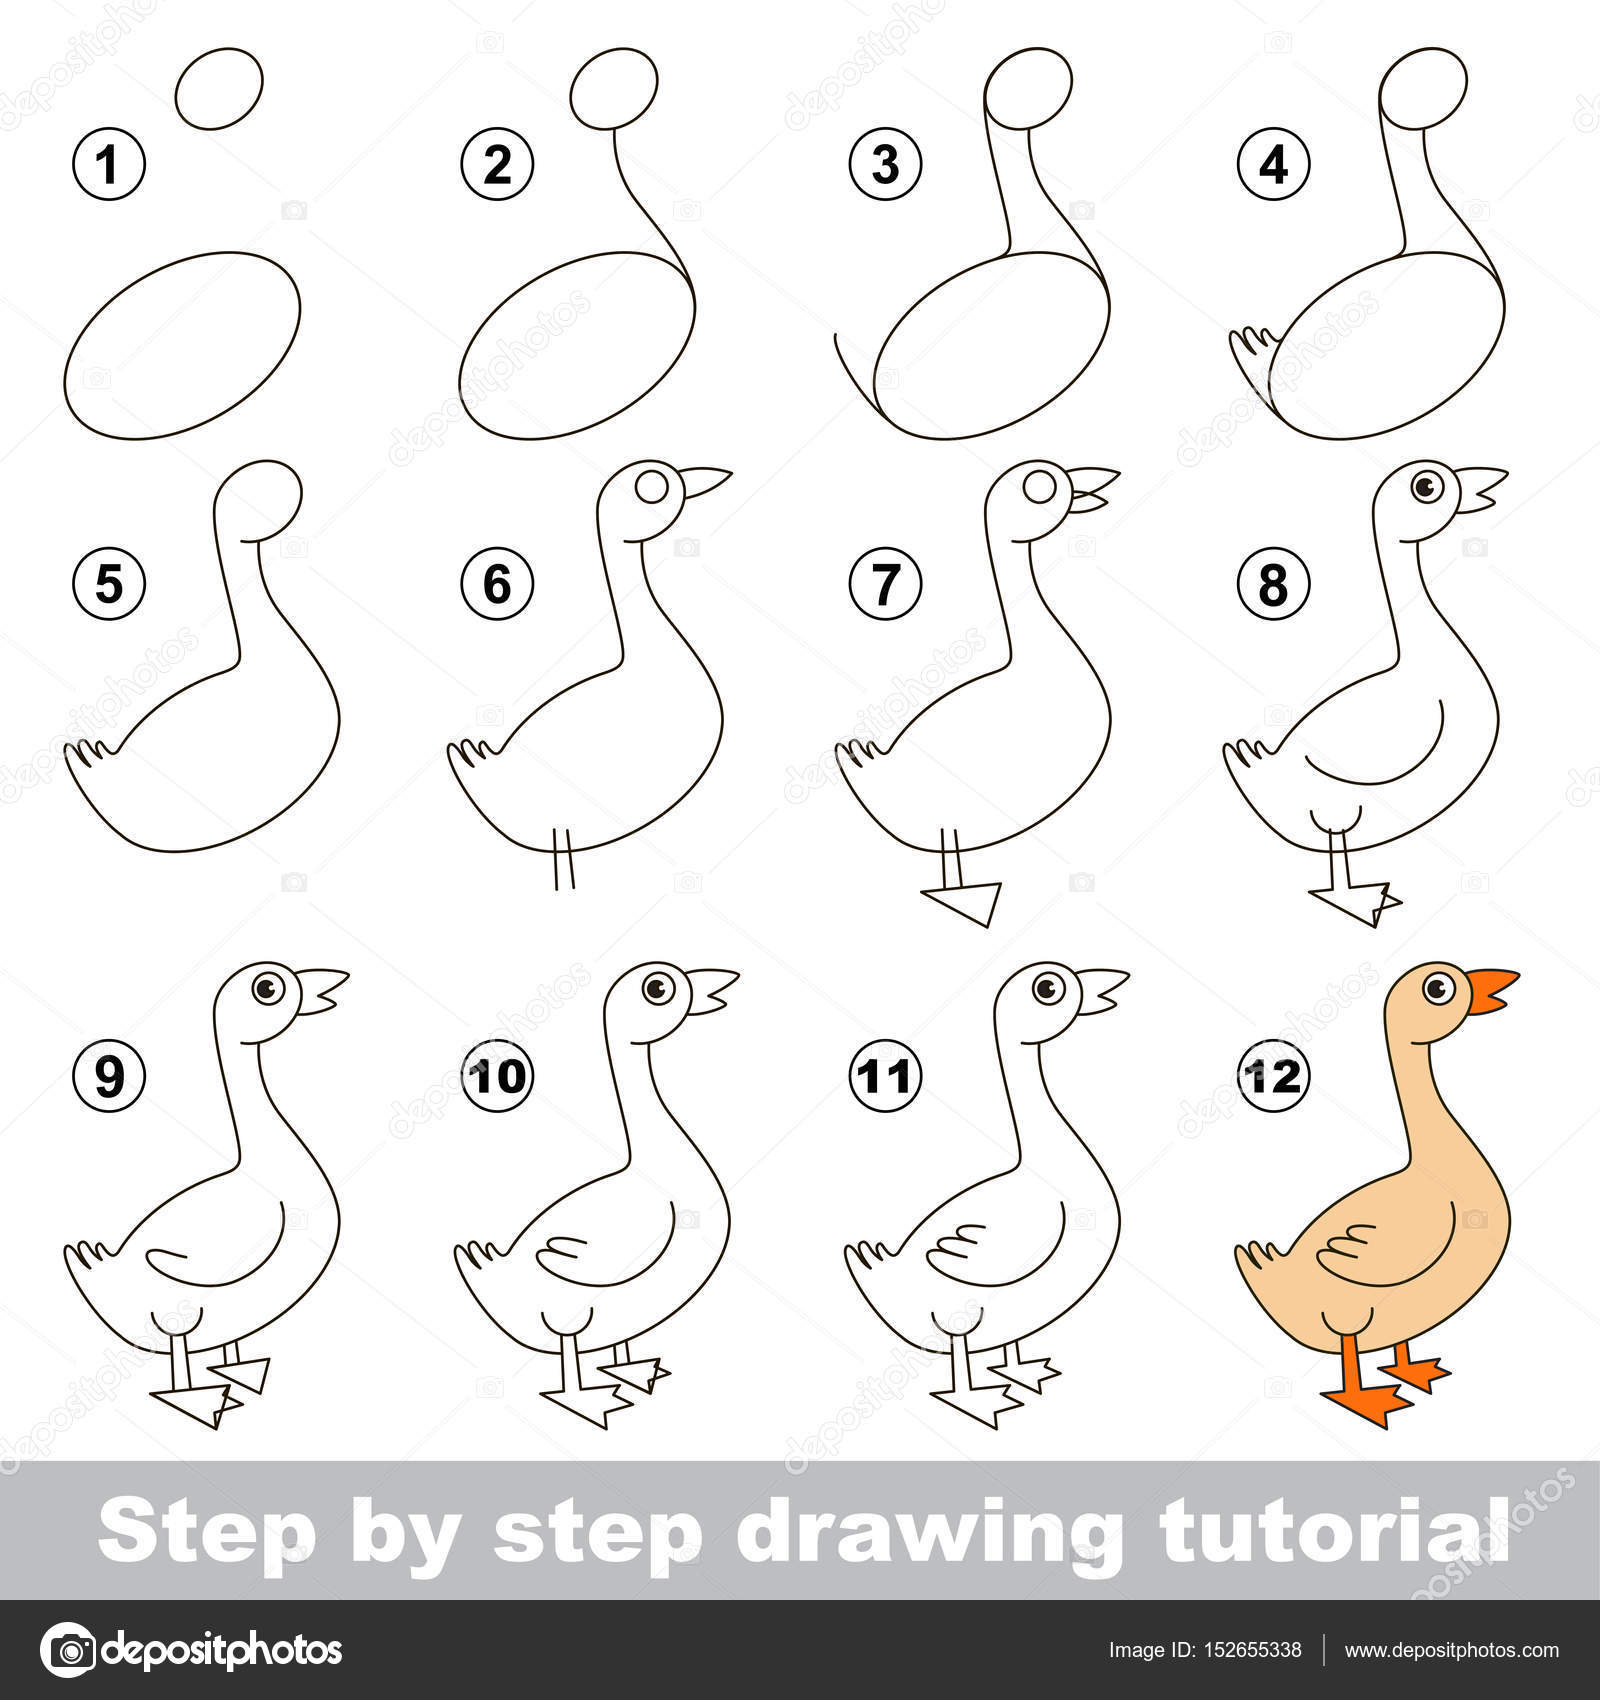 How to Draw a Goose - A Step-by-Step Goose Illustration Tutorial